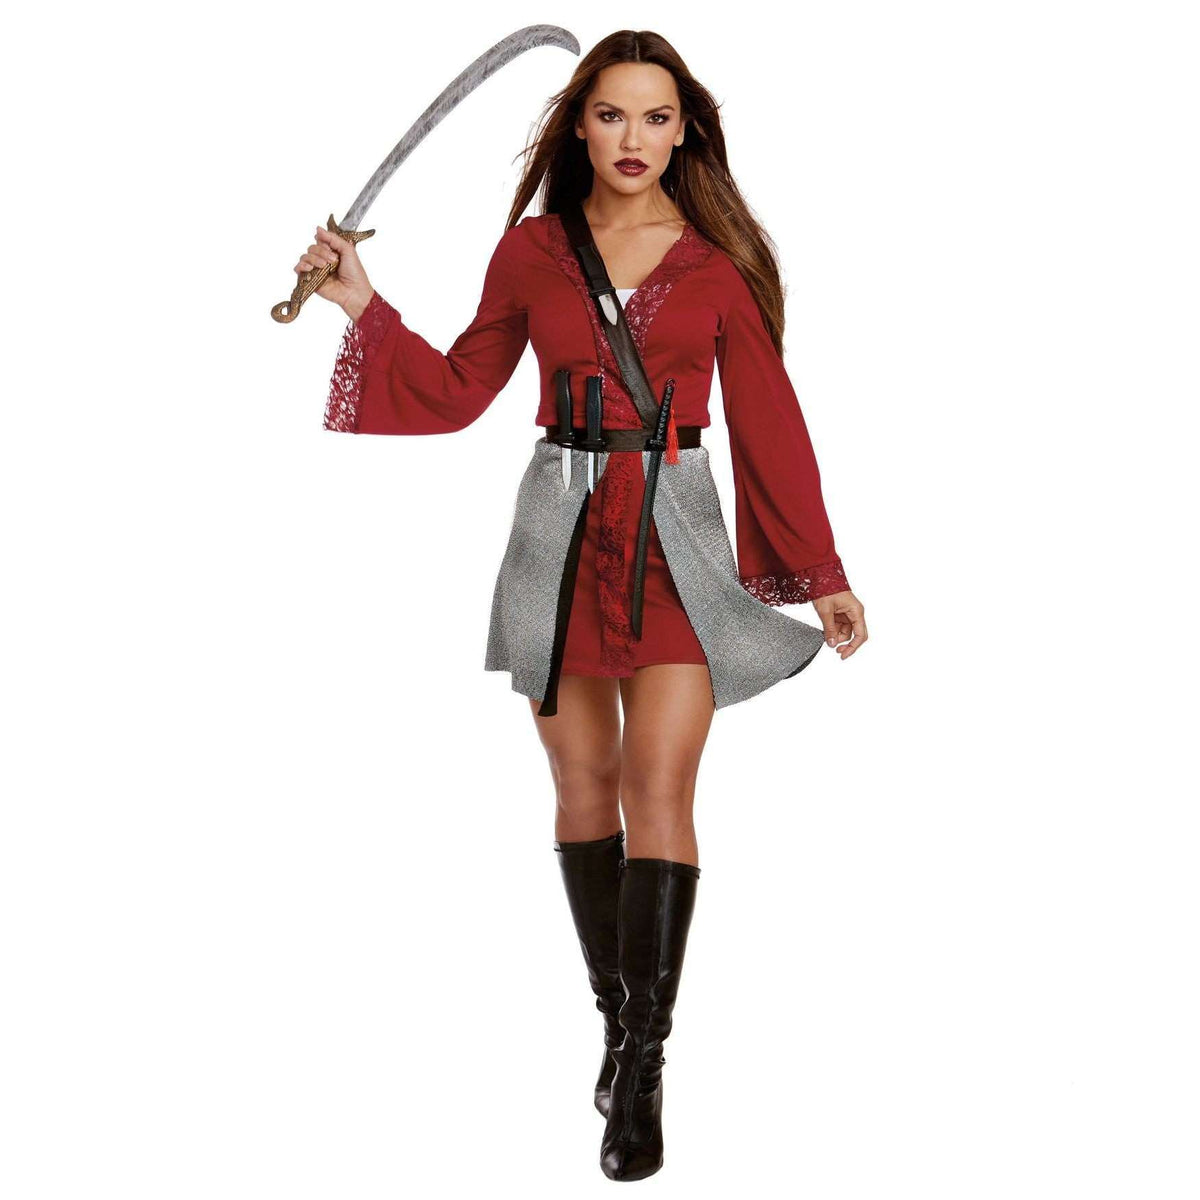 Sultry Majestic Warrior Women's Costume